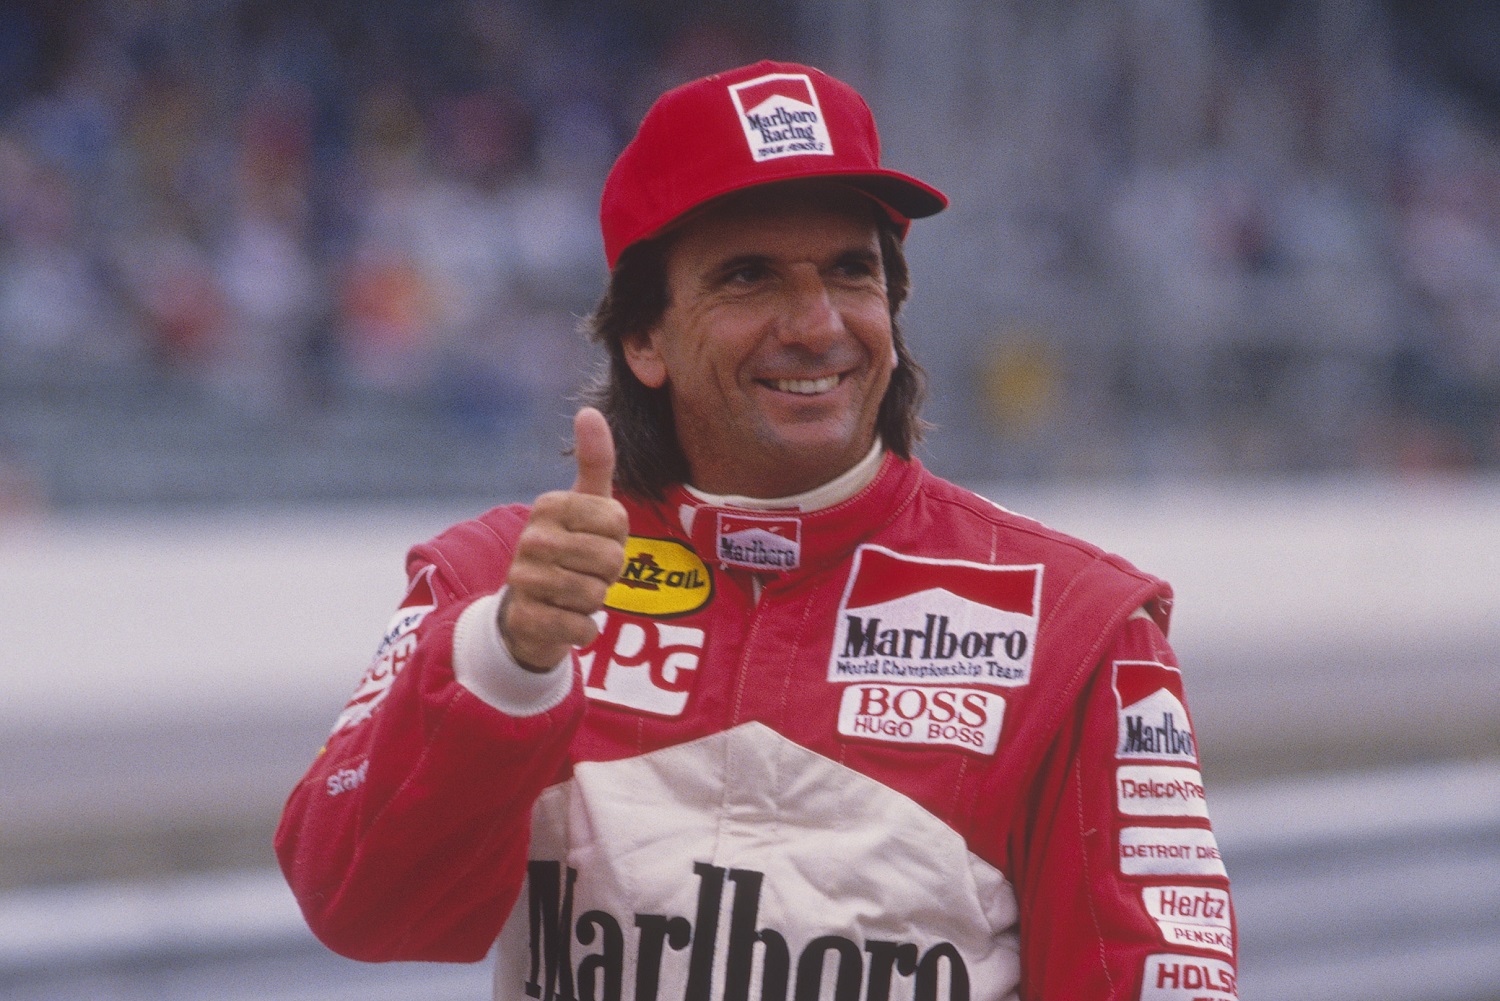 Brazil's Emerson Fittipaldi posing for cameras in his Indy car during time trials for the Indianapolis 500 at the Indianapolis Motor Speedway on May 30, 1993,